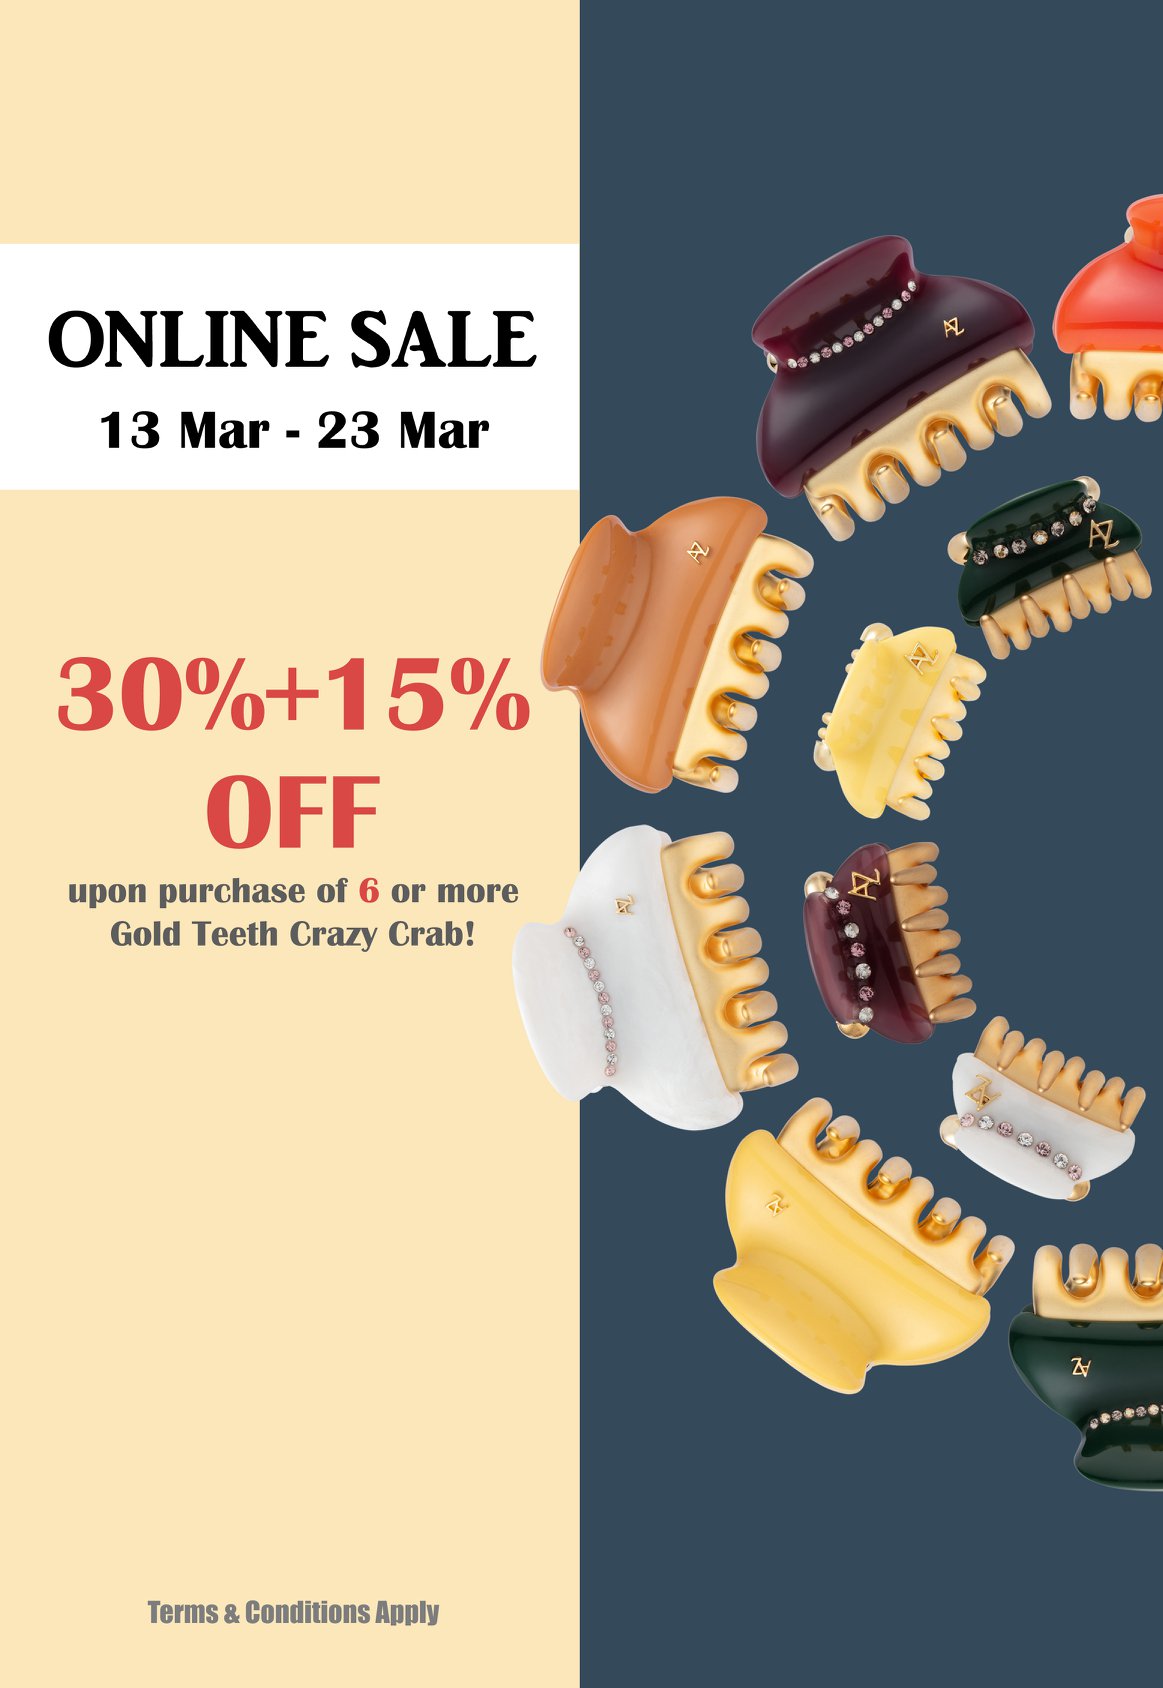 Thanks for your support! Please be invited to enjoy 30% OFF + EXTRA 15% OFF upon purchase of 6 pcs or above of Classic Gold Teeth Crazy Crab by entering the code "GTC15" before payment on ALEXANDRE ZOUARI's Online Shop from today until 23 Mar! 為感謝顧客支持，即日起至3月23日，於ALEXANDRE ZOUARI網上商店選購六件或以上經典閃爍金爪系列，於付款前輸入"GTC15" 優惠碼，即可享有正價七折 + 額外八五折優惠！ For any updates of AZ:...